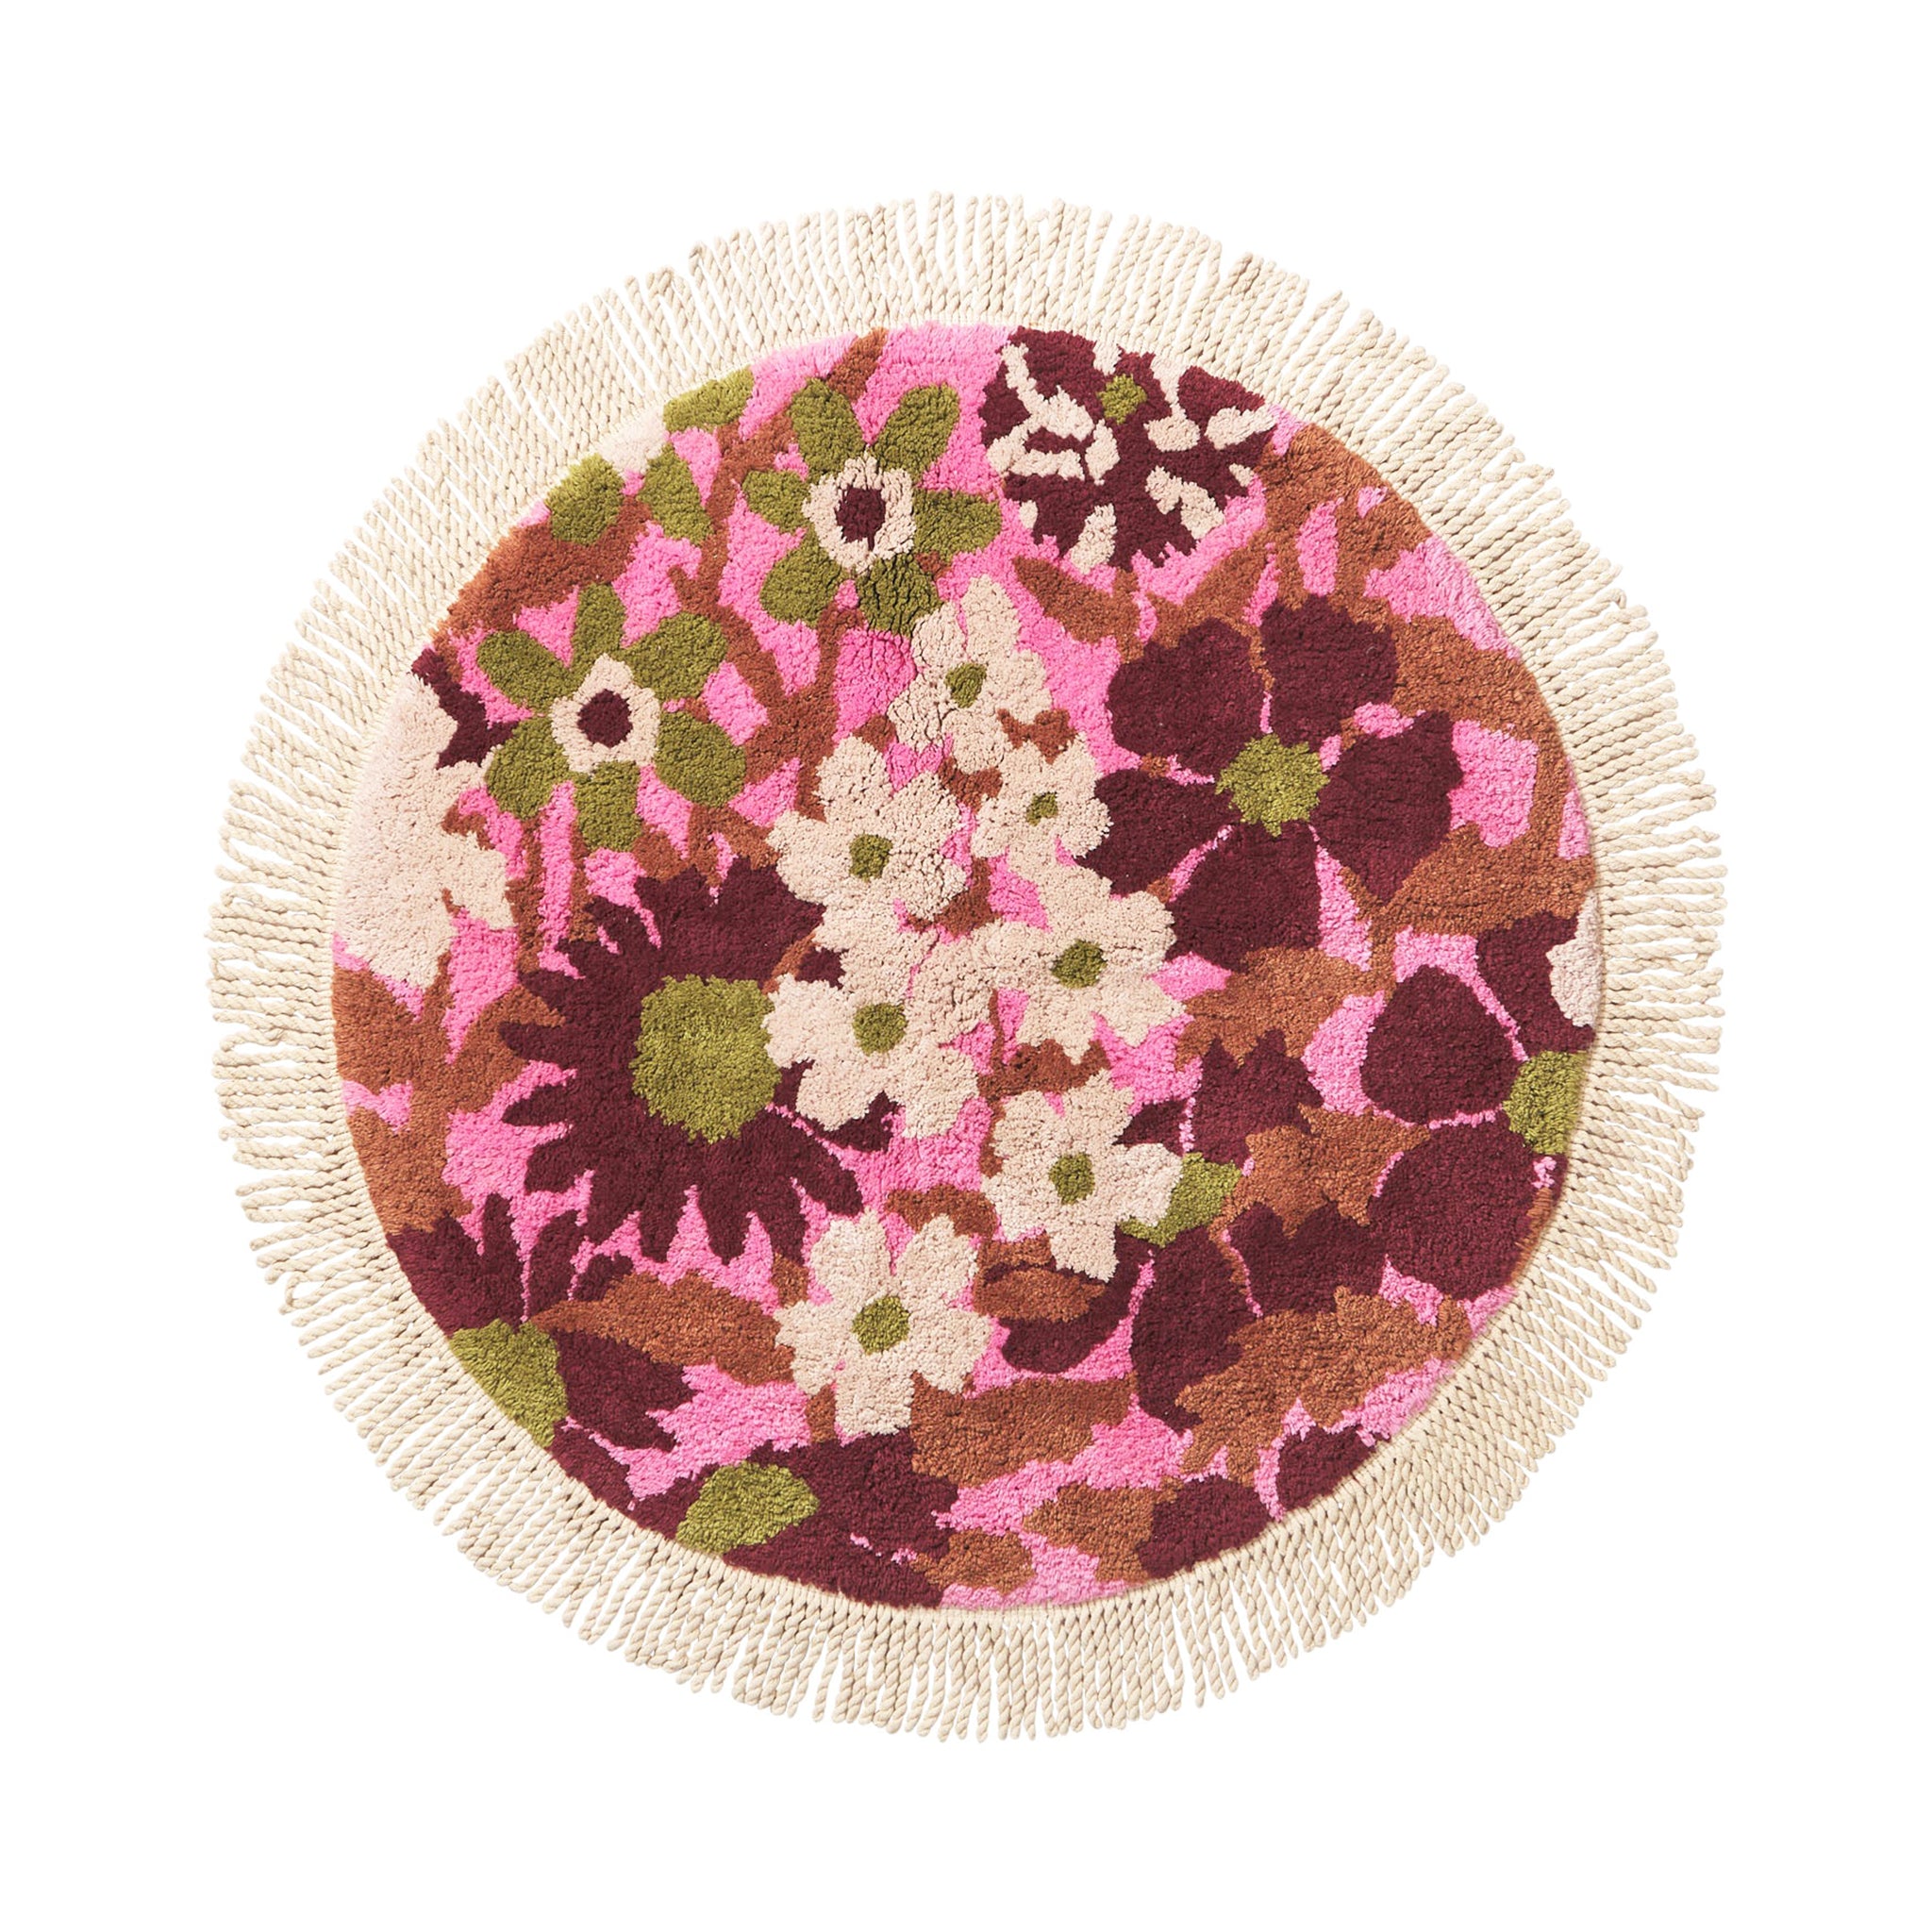 A pink, green and white floral print circular bath mat with a fringe detail around the edge.